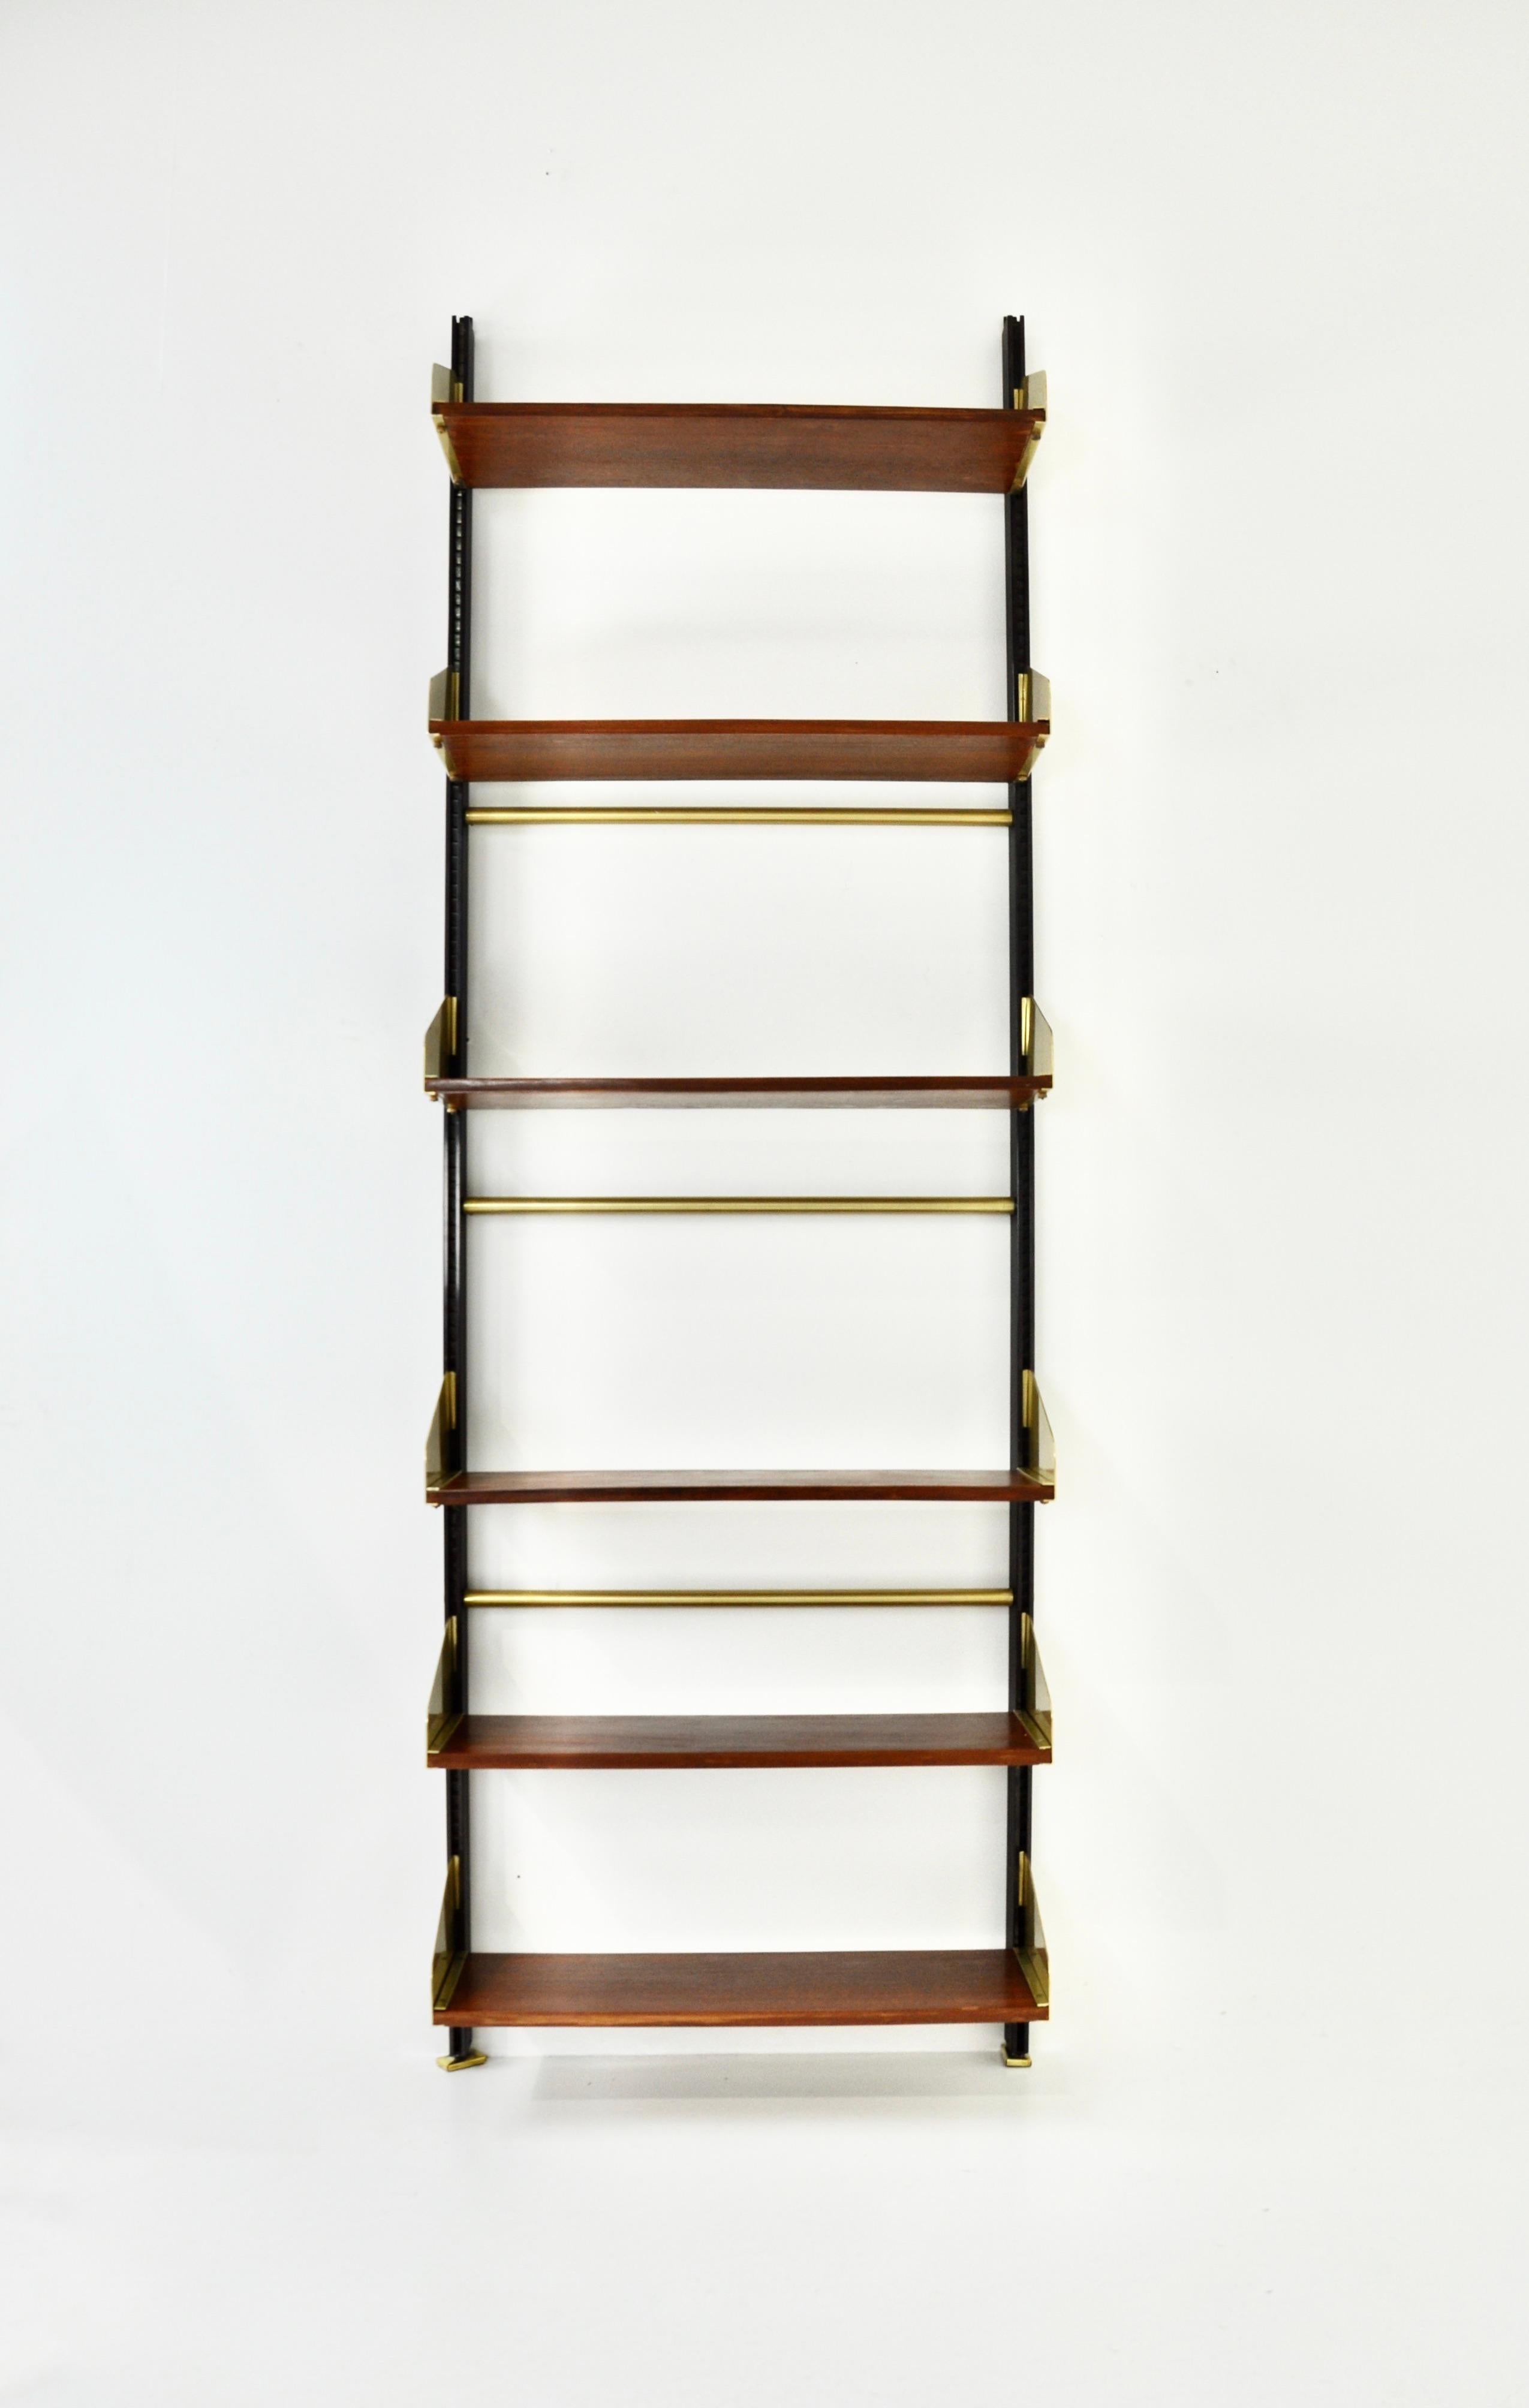 Modular wall unit in wood, brass and metal with 6 shelves. Height-adjustable. Wear due to time and age of the wall unit.